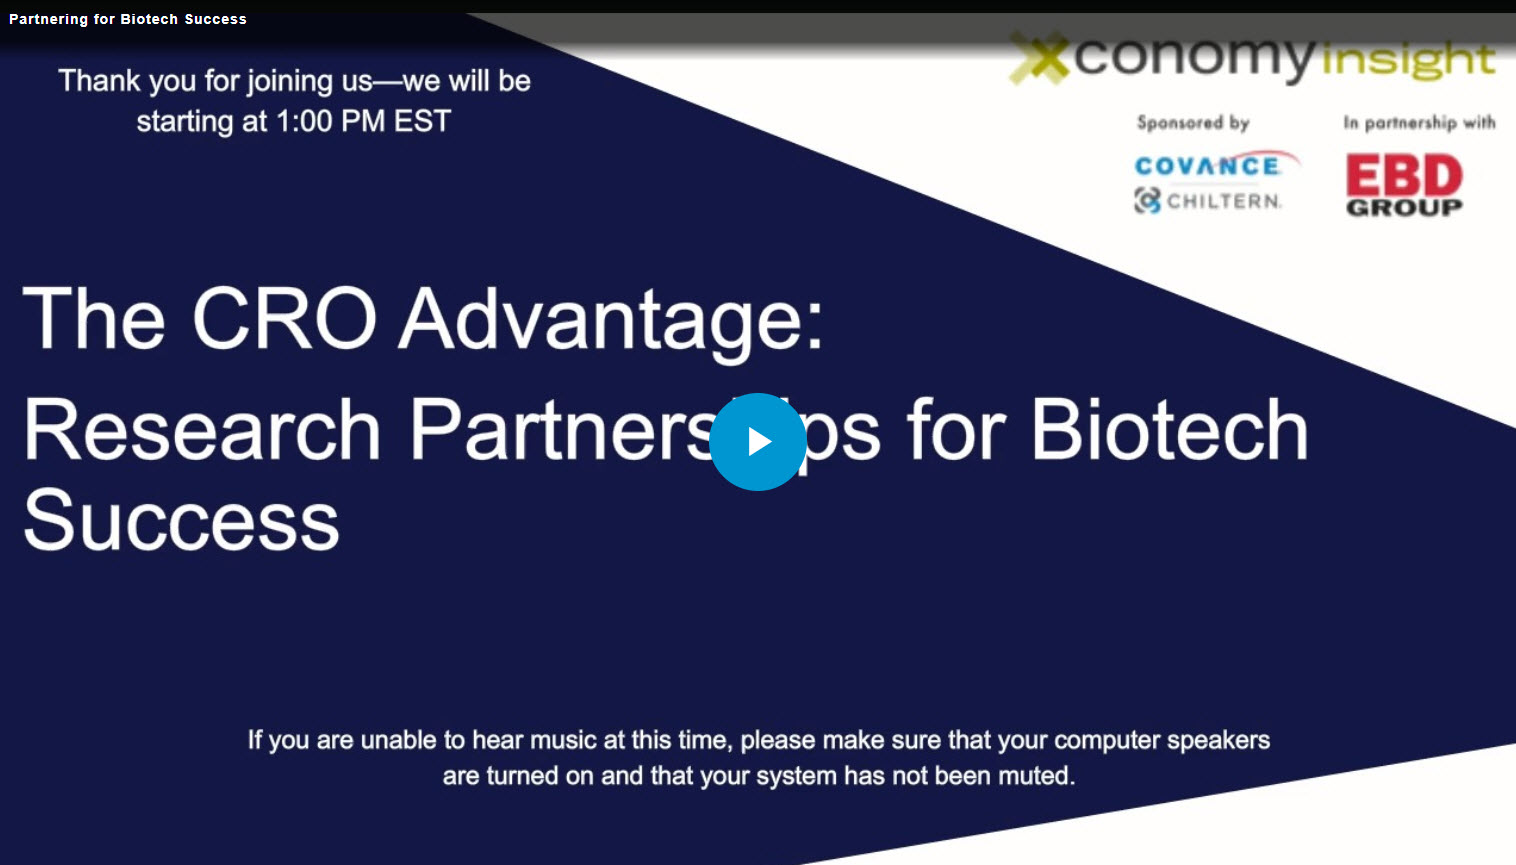 Partnering for Biotech Success